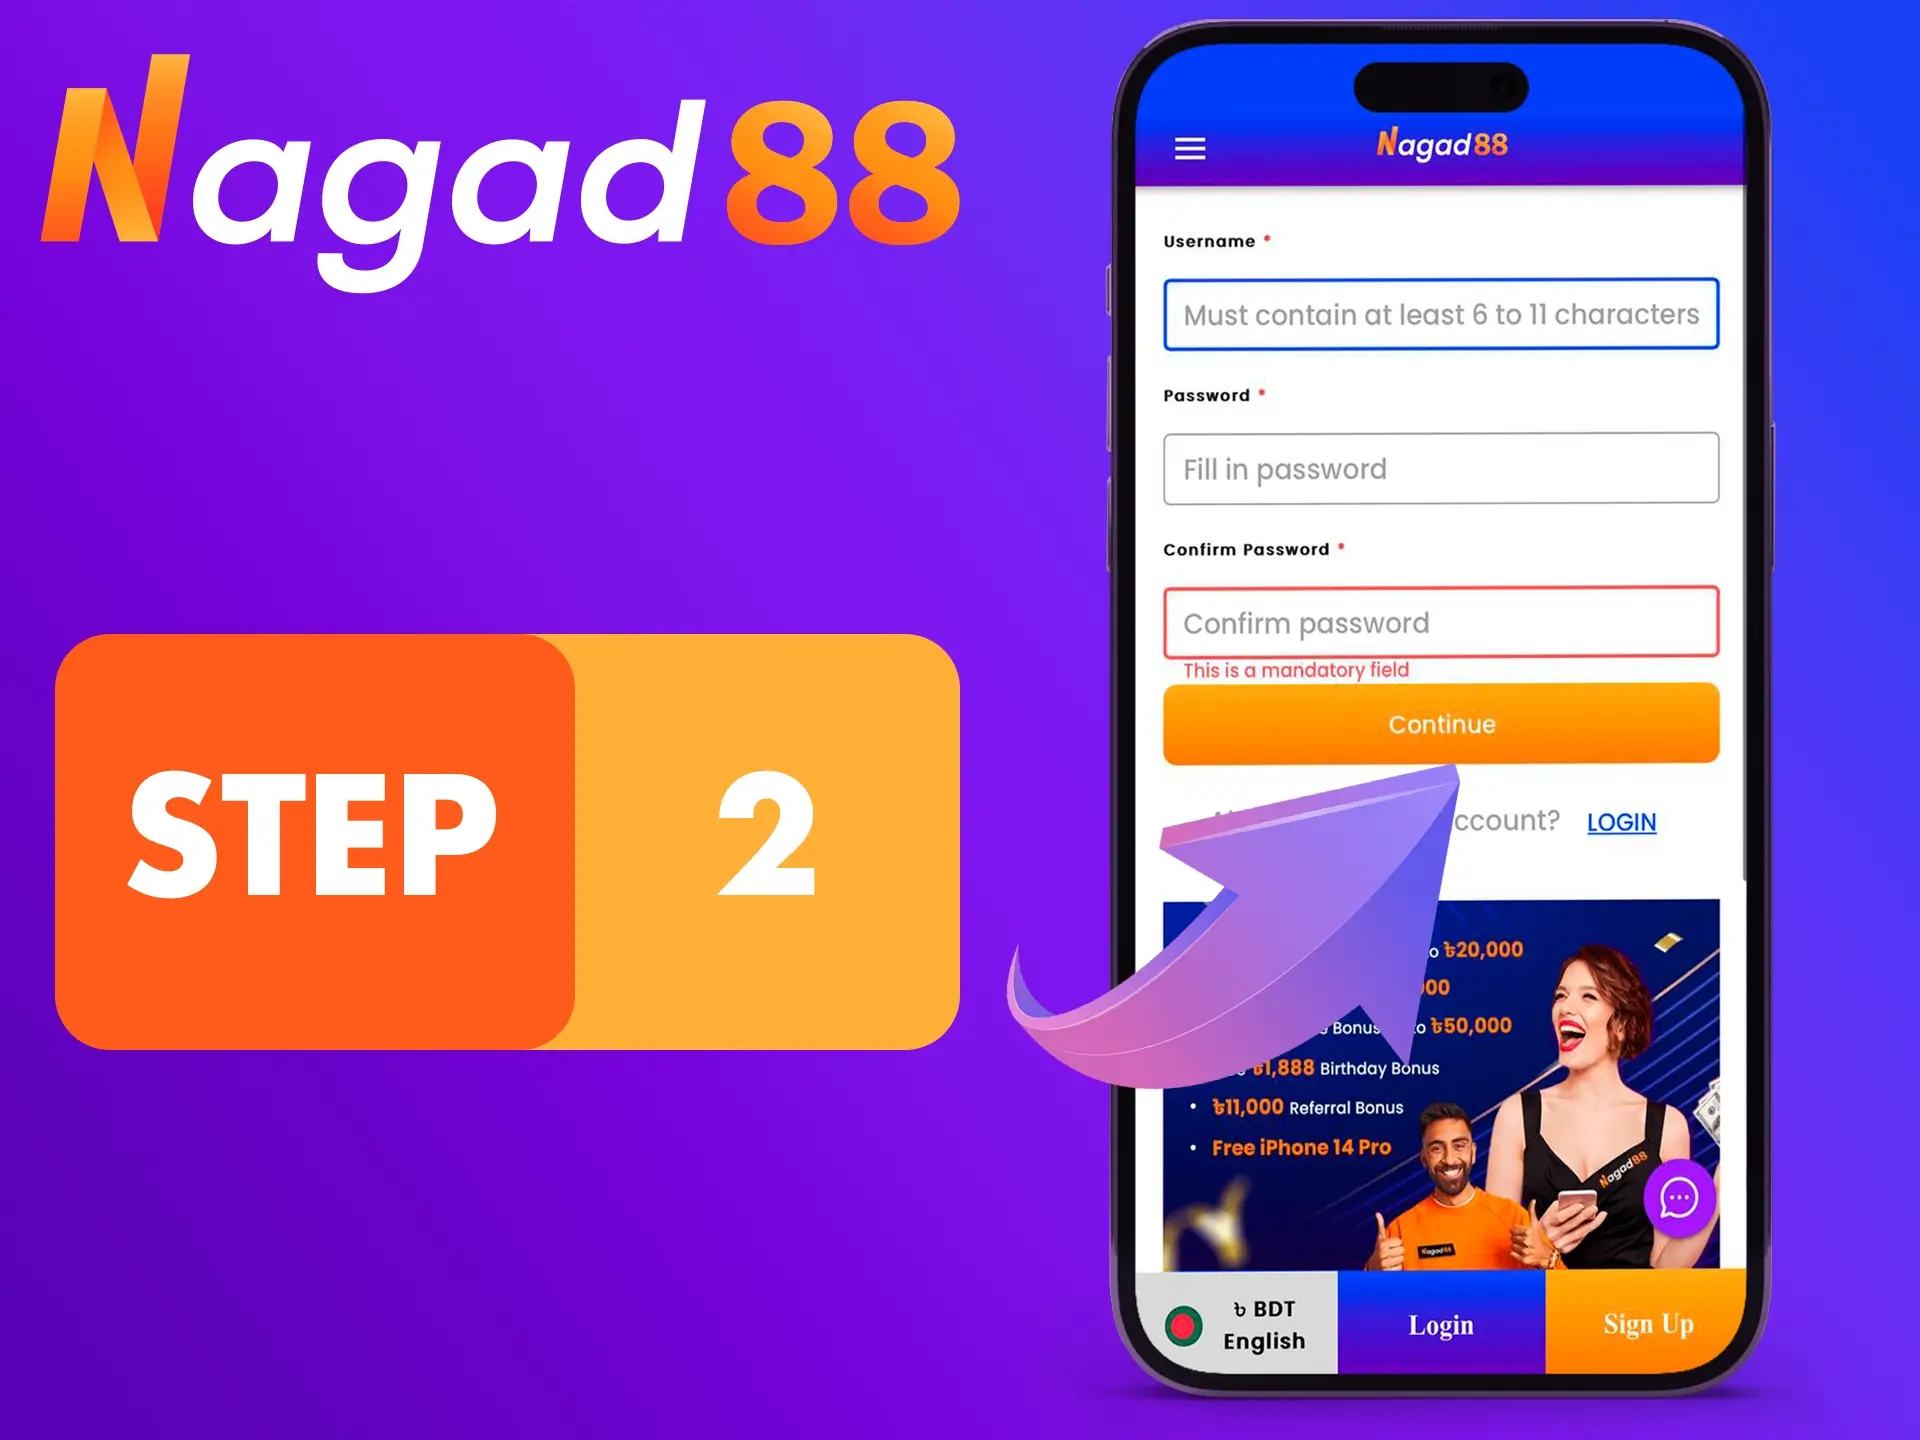 Complete a simple registration at Nagad88 Casino.